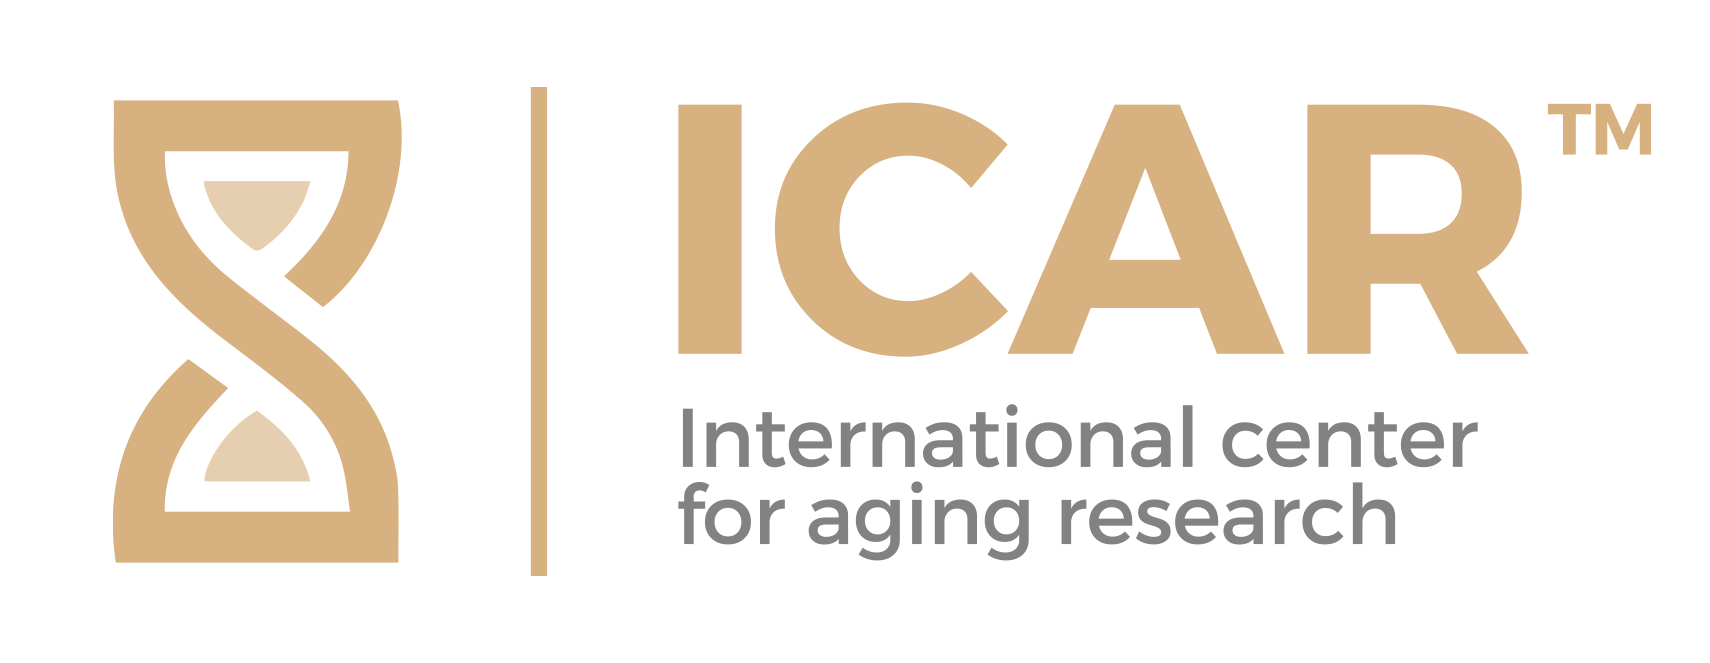 ICAR International center for aging research